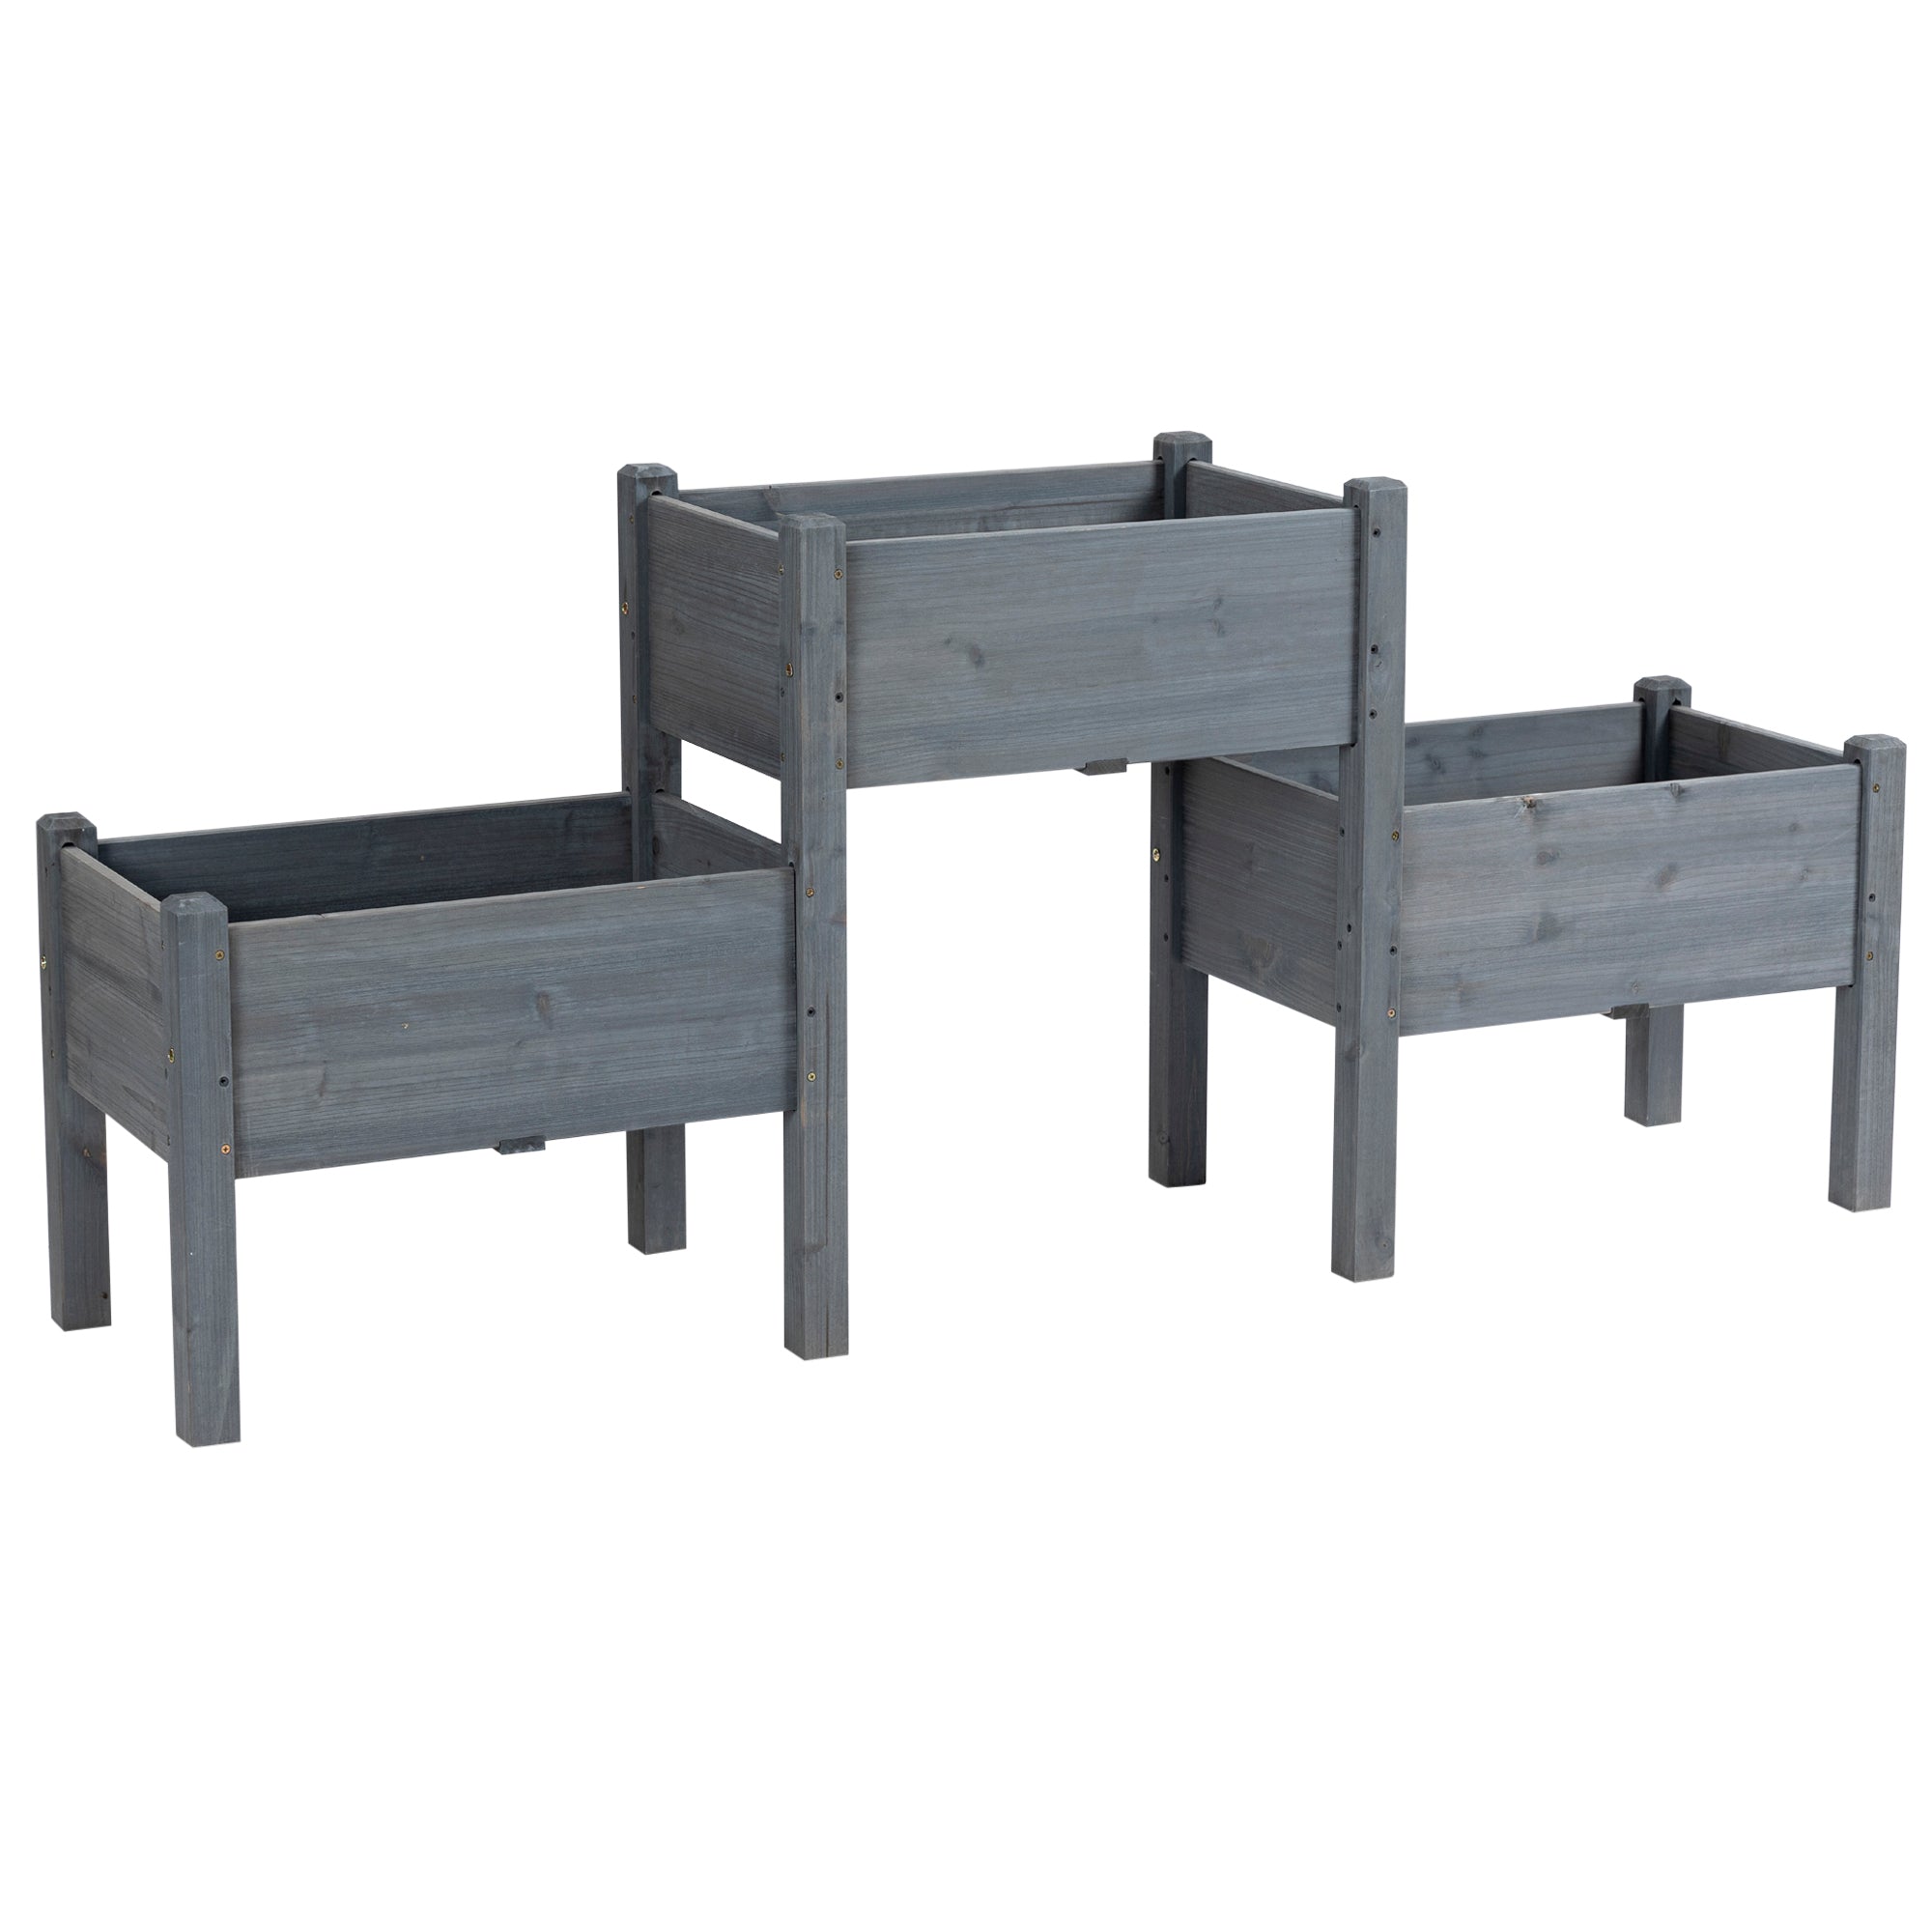 Outsunny Raised Garden Bed with 3 Planter Box gray-wood